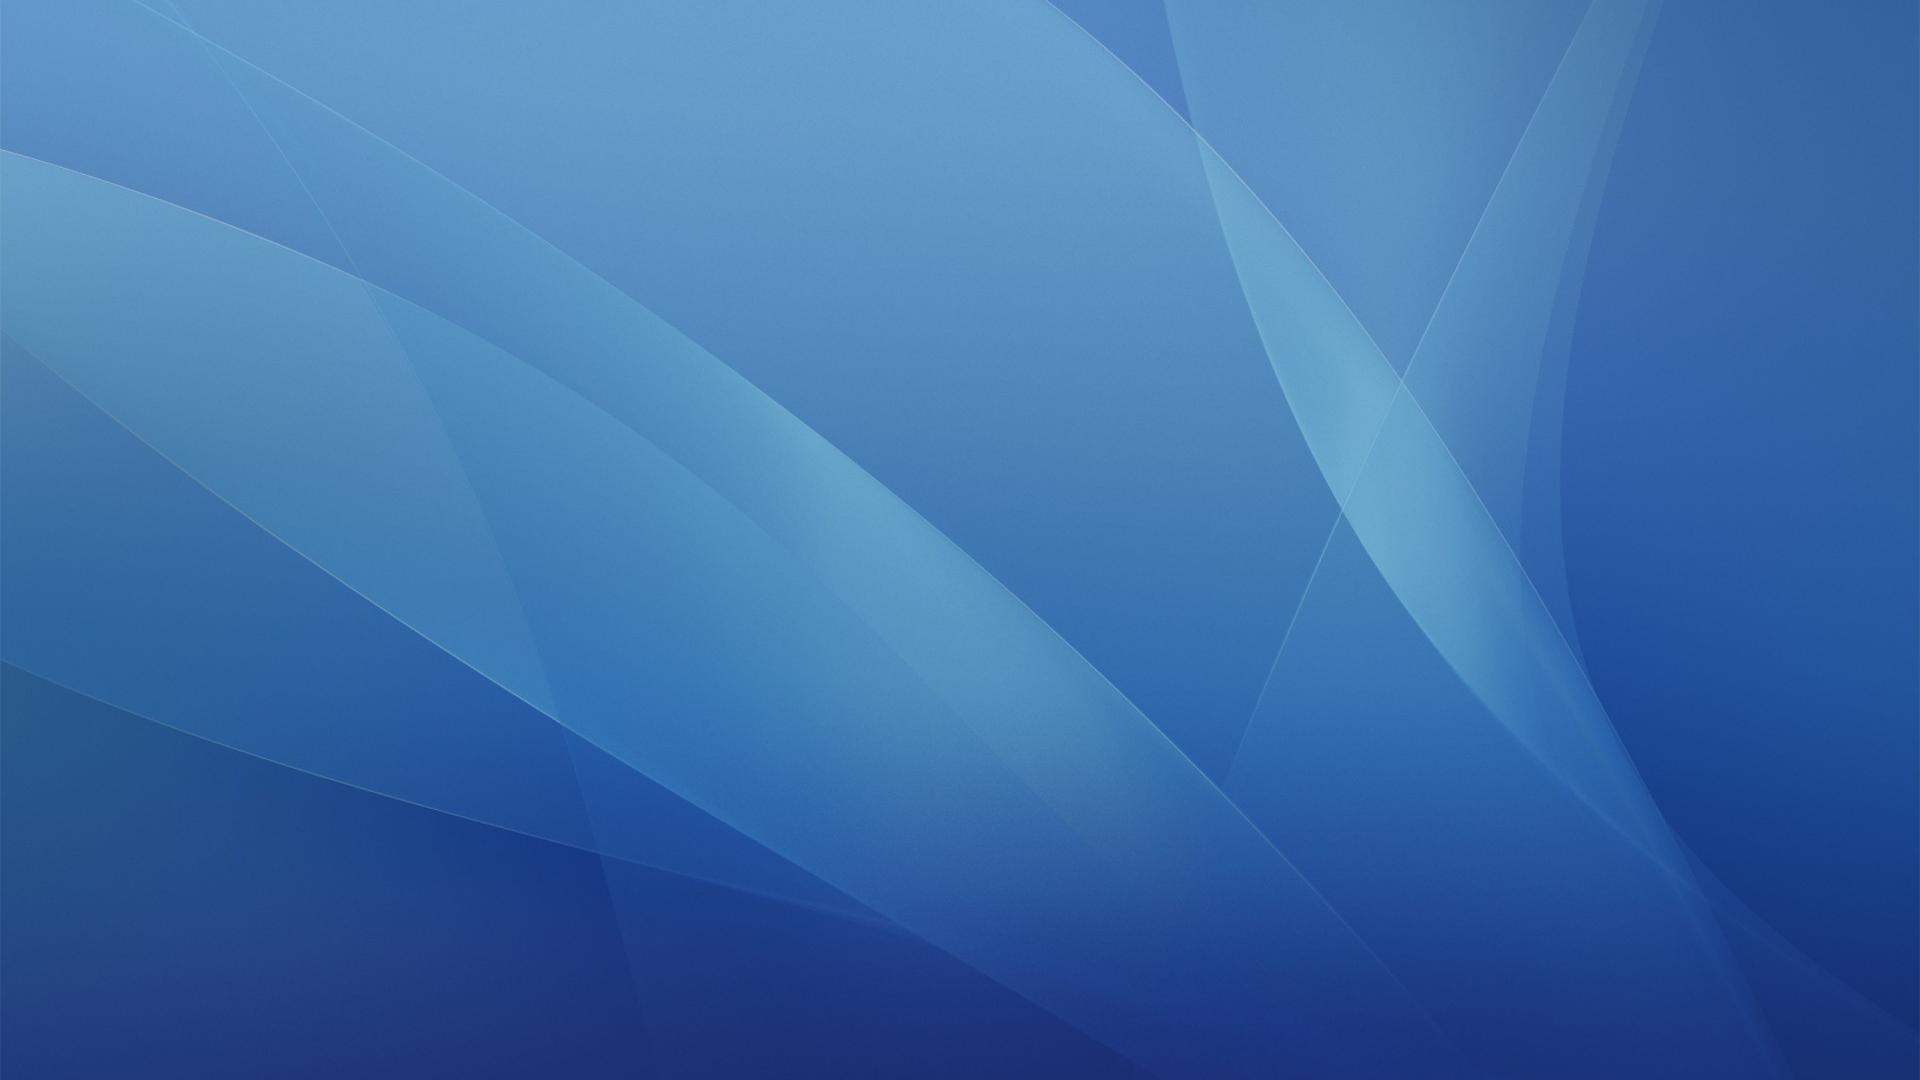 Abstract Blue Texture Wallpaper Background